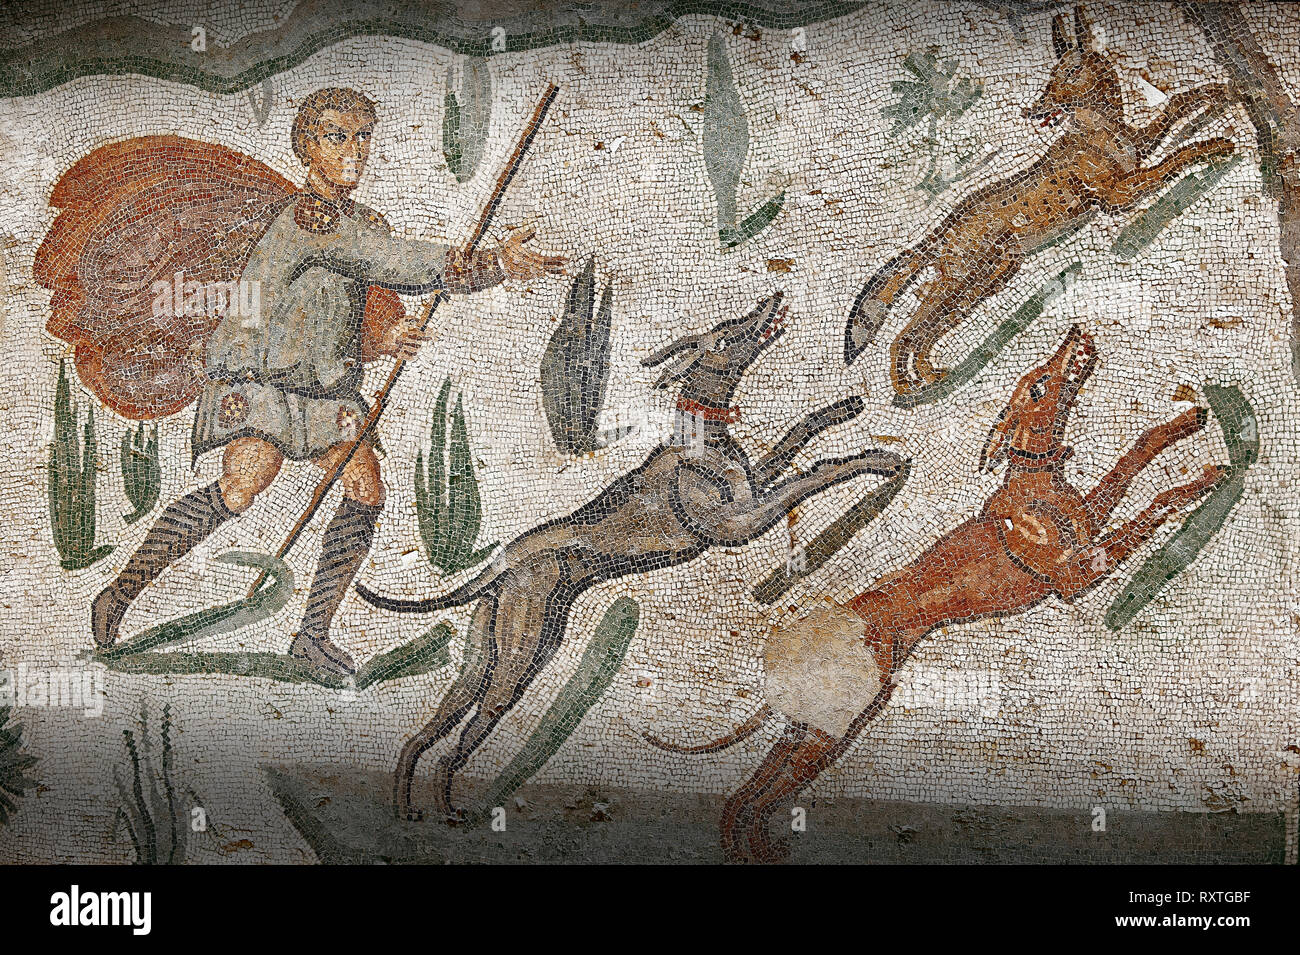 Hunter with dogs chasing a fox from the Room of The Small Hunt, no 25 - Roman mosaics at the Villa Romana del Casale 4th century AD. Sicily, Italy. A  Stock Photo